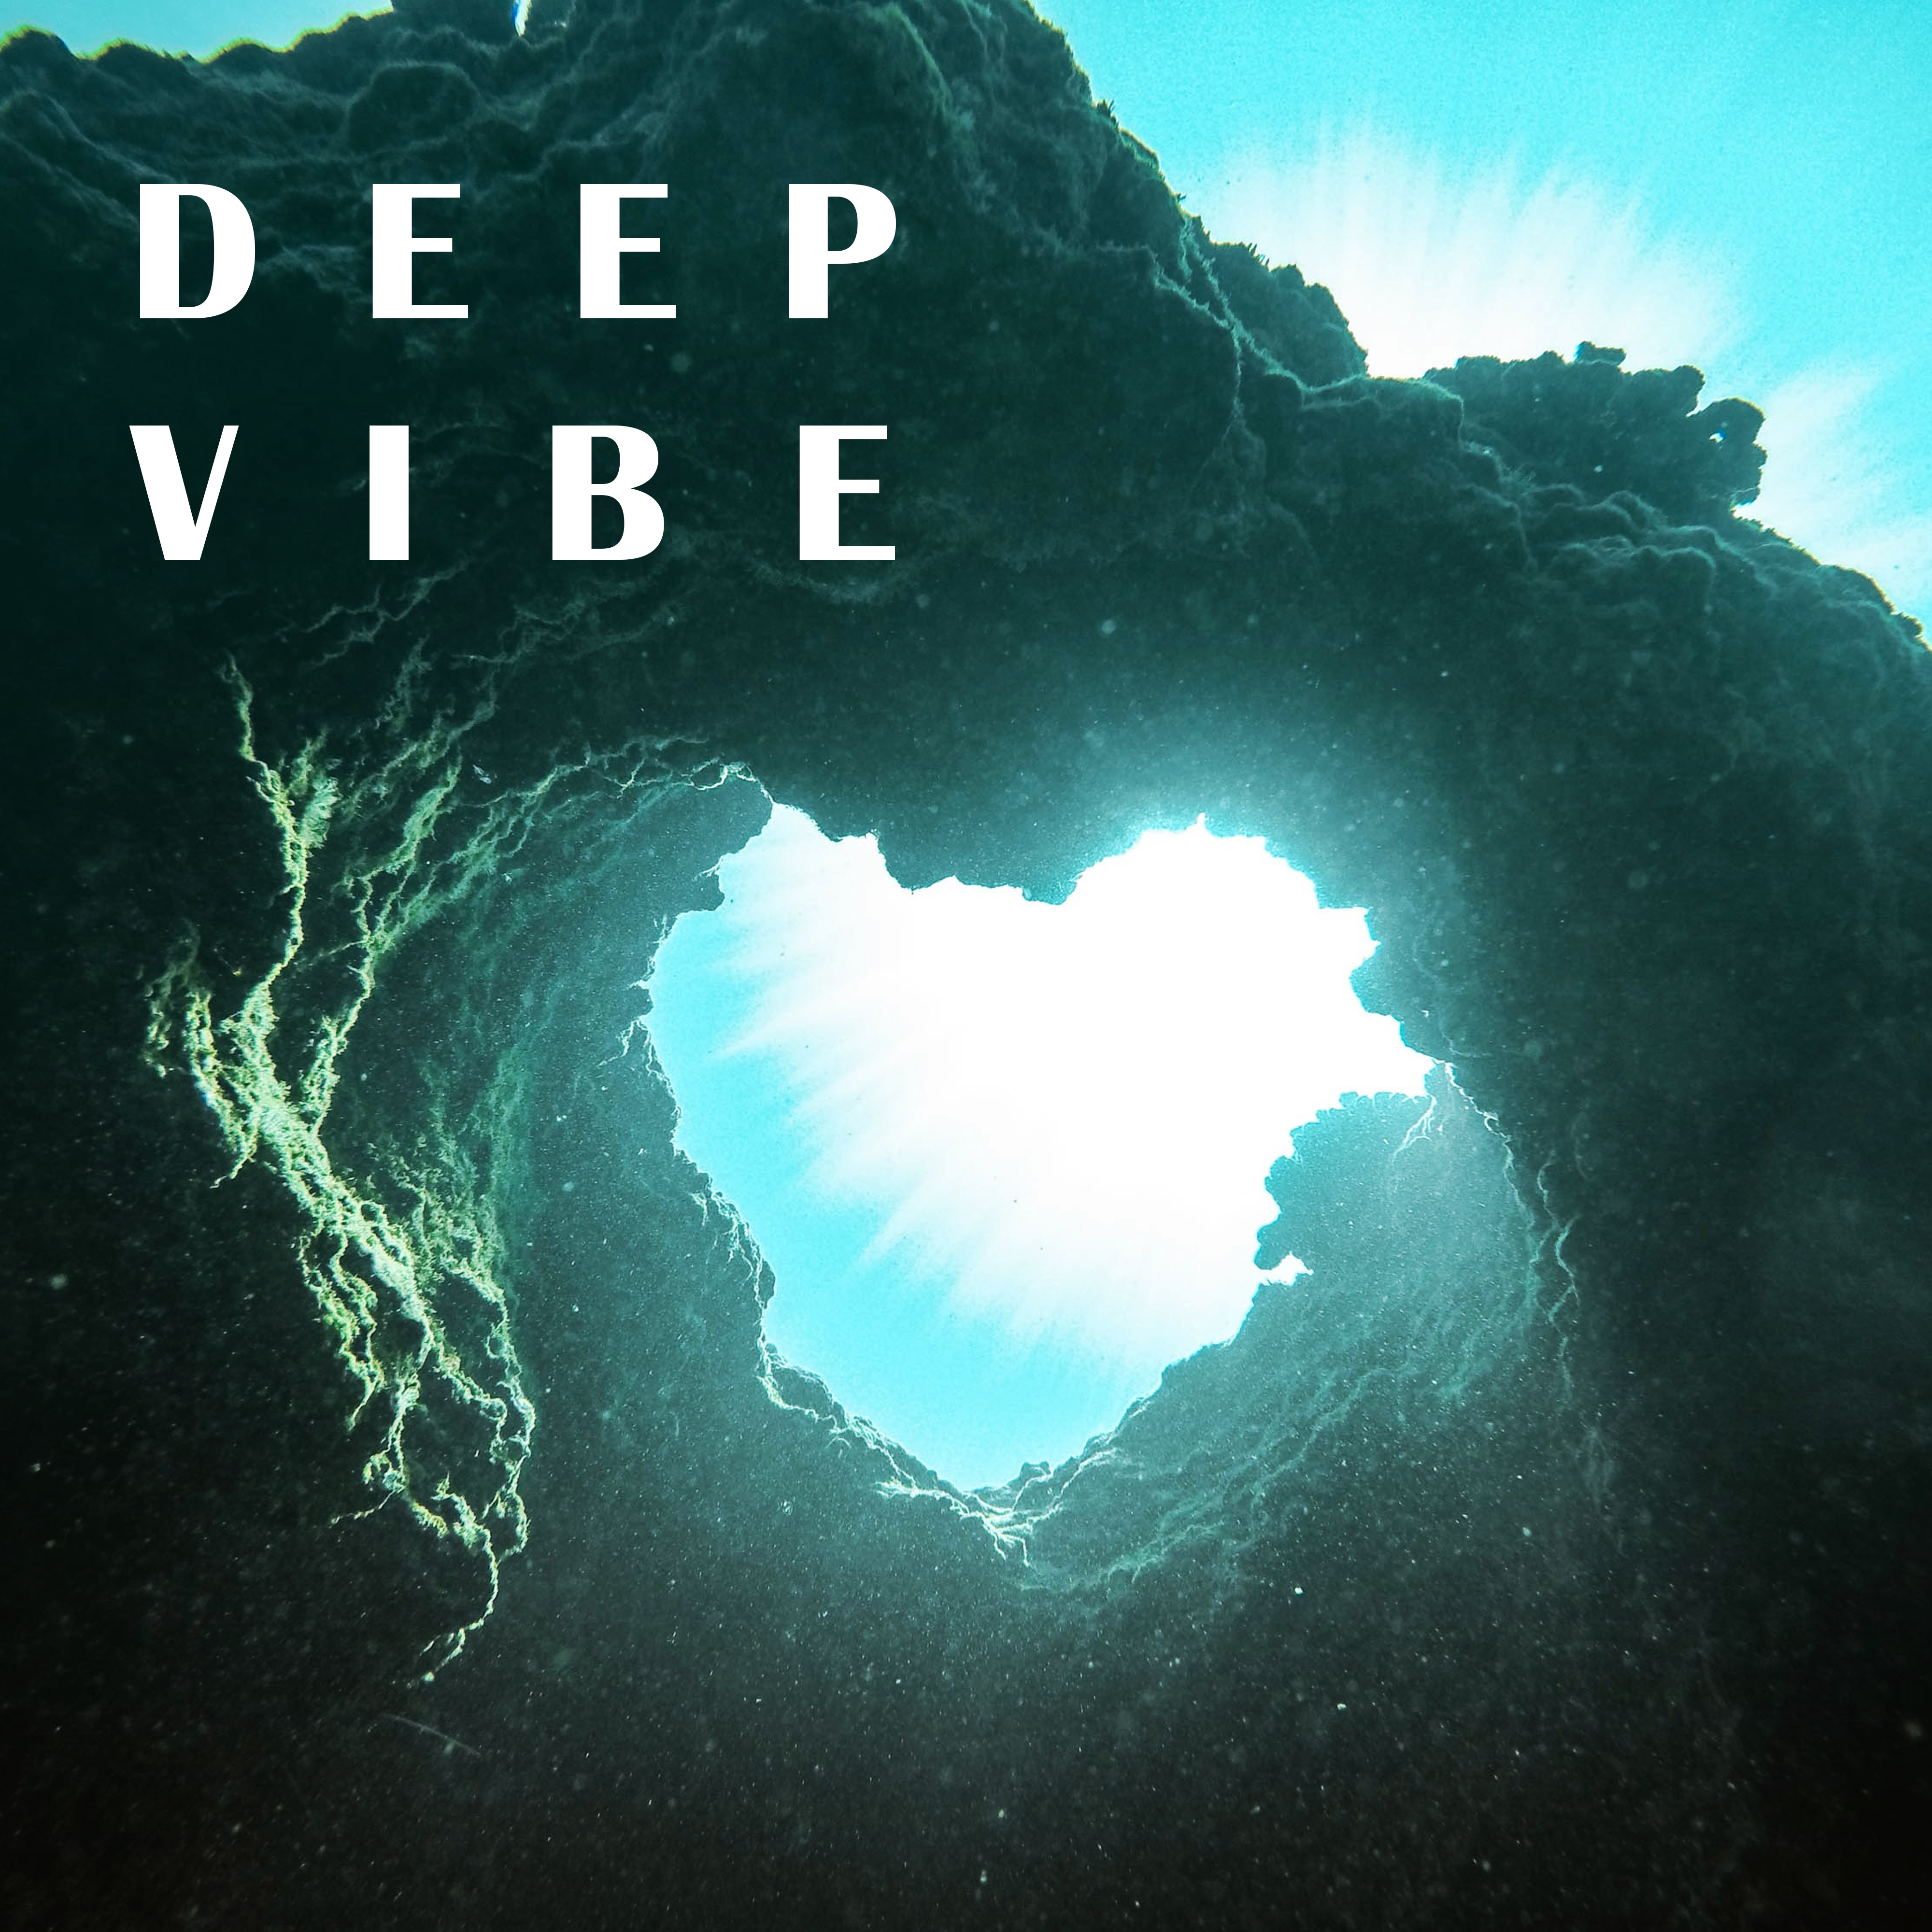 Deep Vibe  Sensual Music, Soothing Chill Out Vibrations, Deep Relaxation, Chill Out 2017